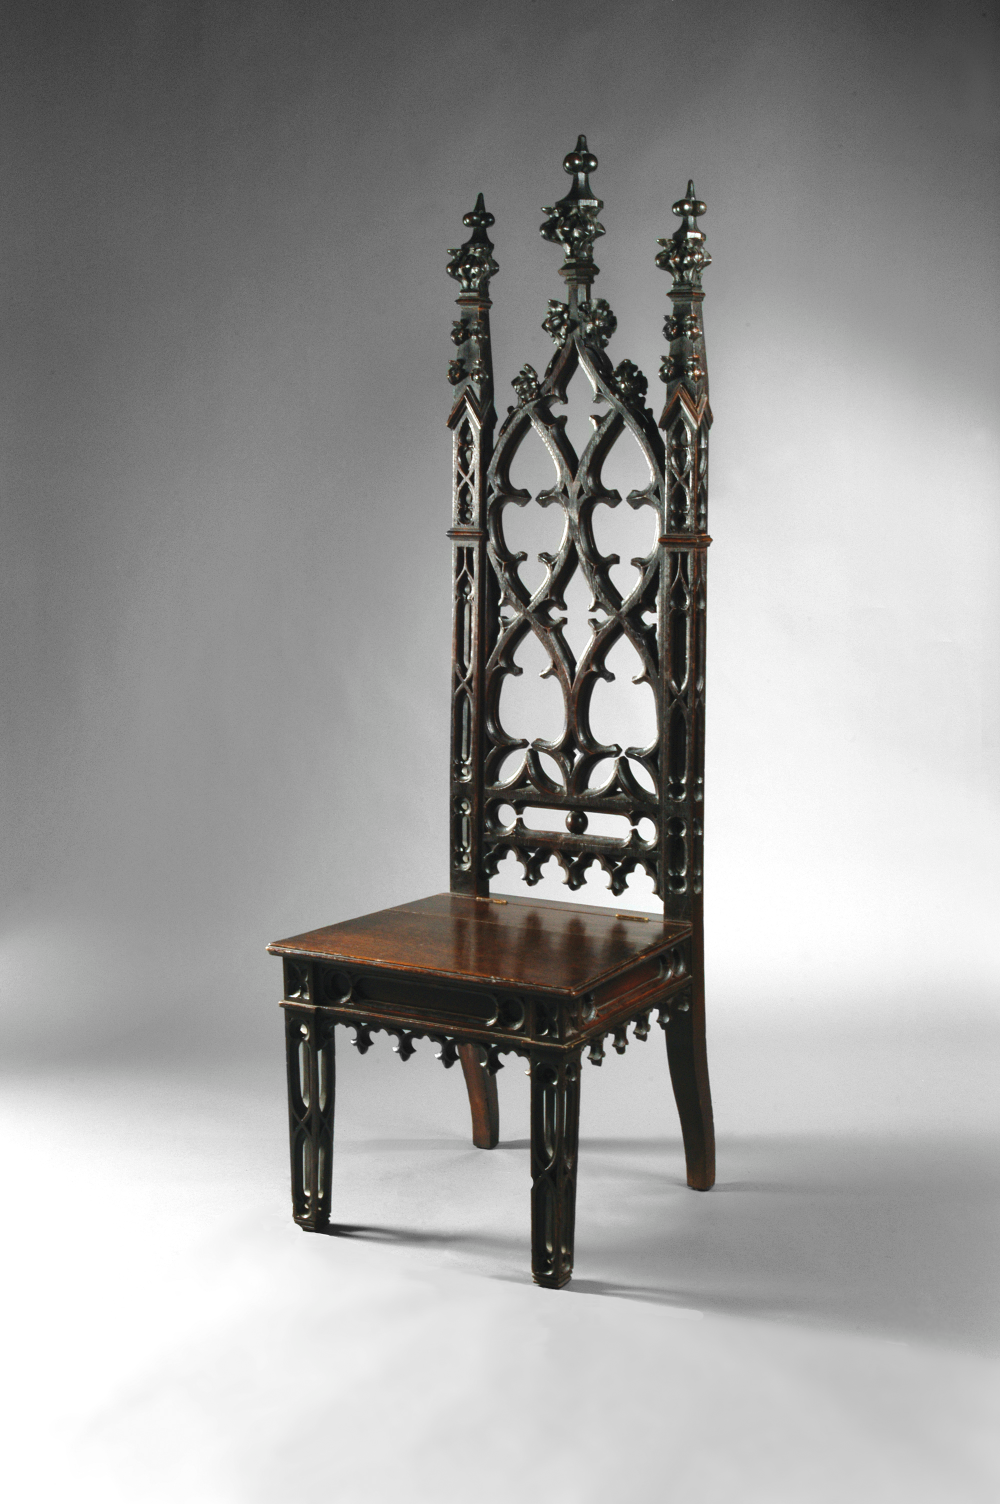 Gothic furniture buying guide